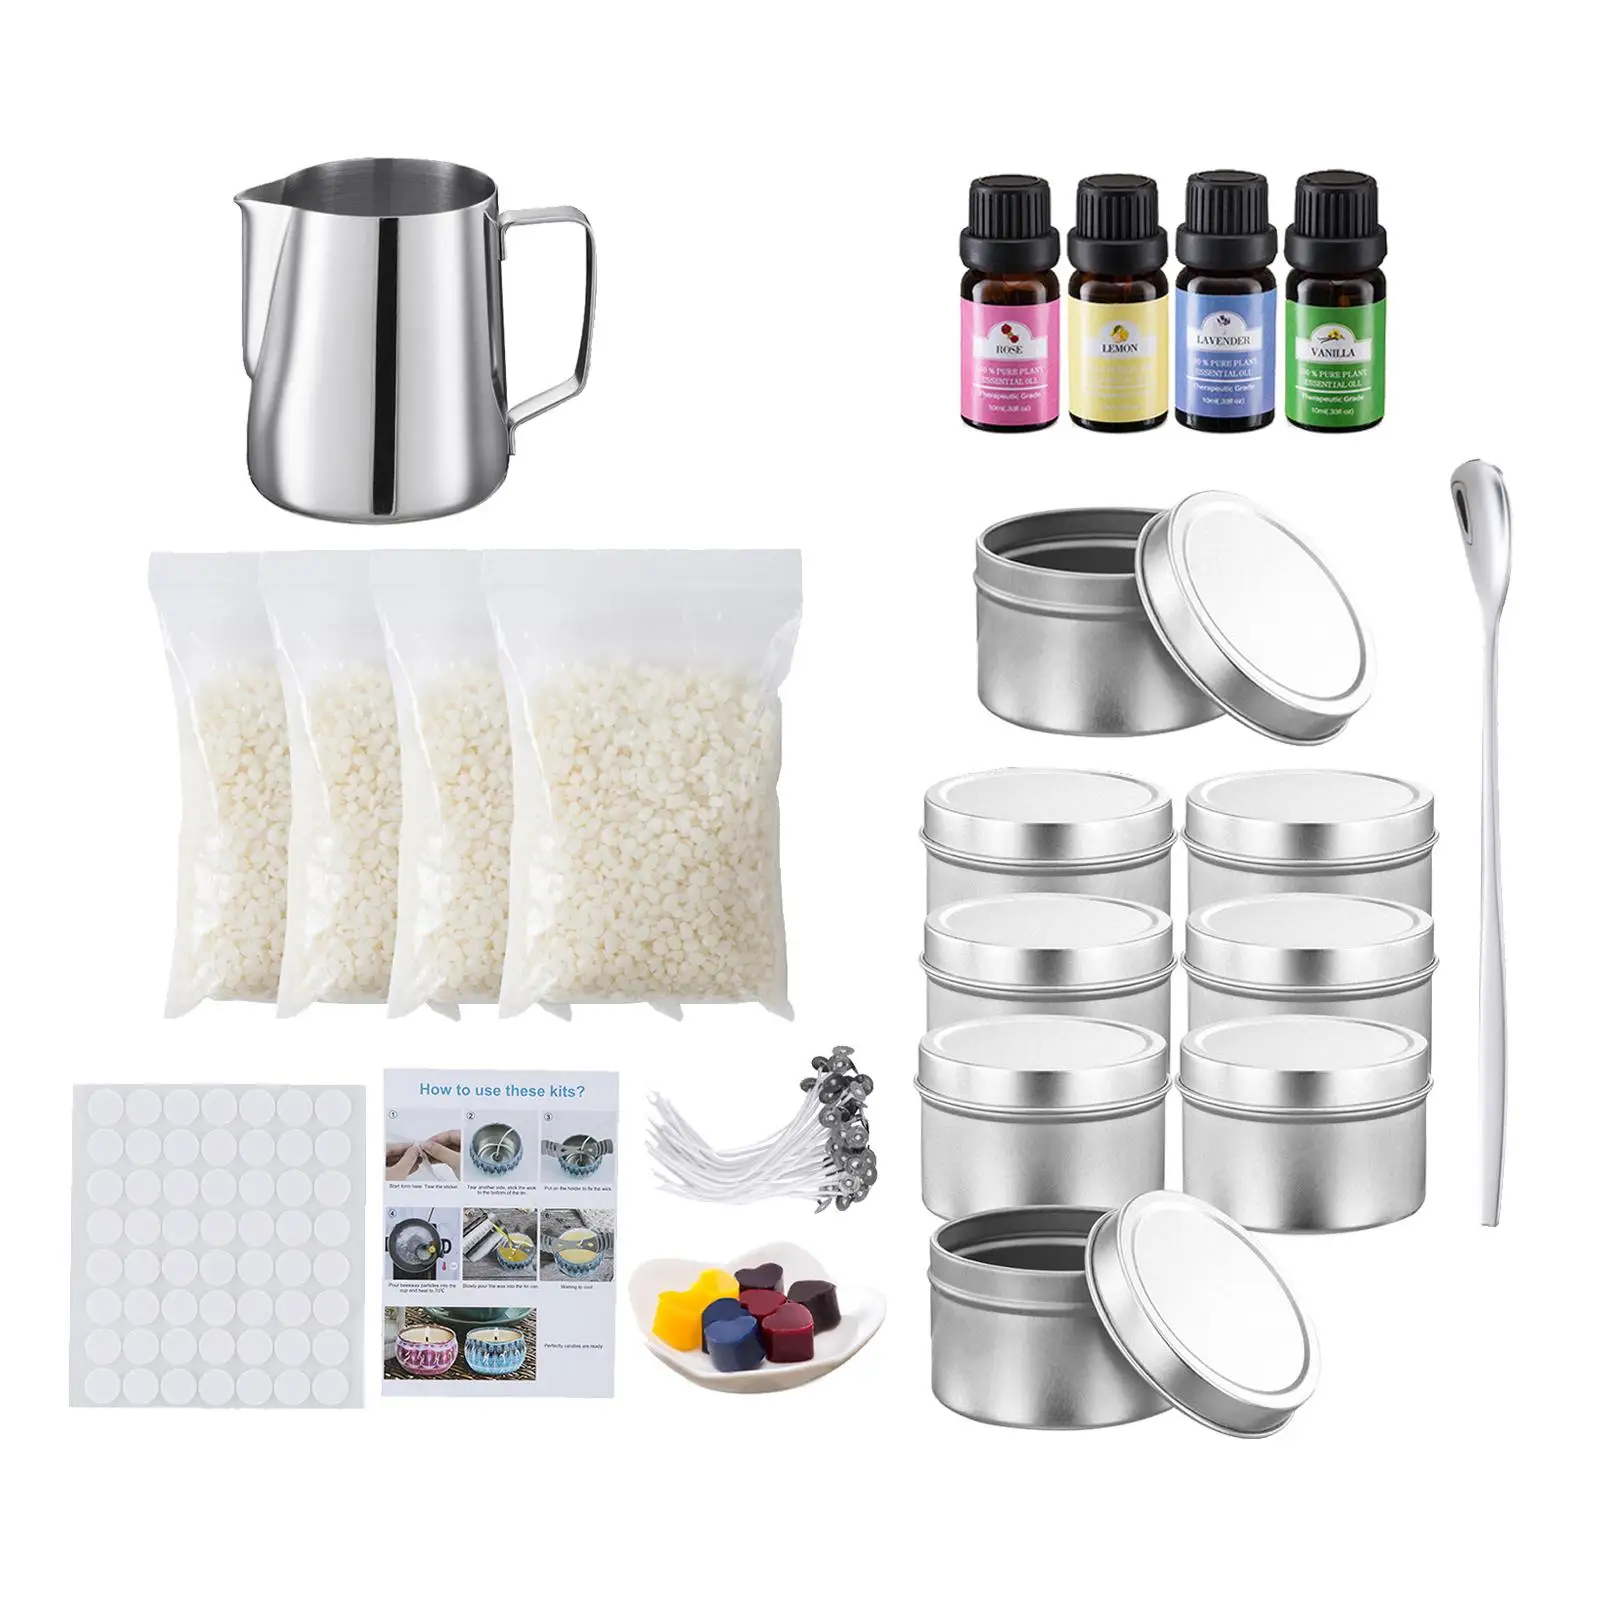 Candle Making Kit Supplies Tools, Melting Spouts Boiler Pot, Candle Wicks, Wick Stickers, Wick Holder, Stirring Spoon